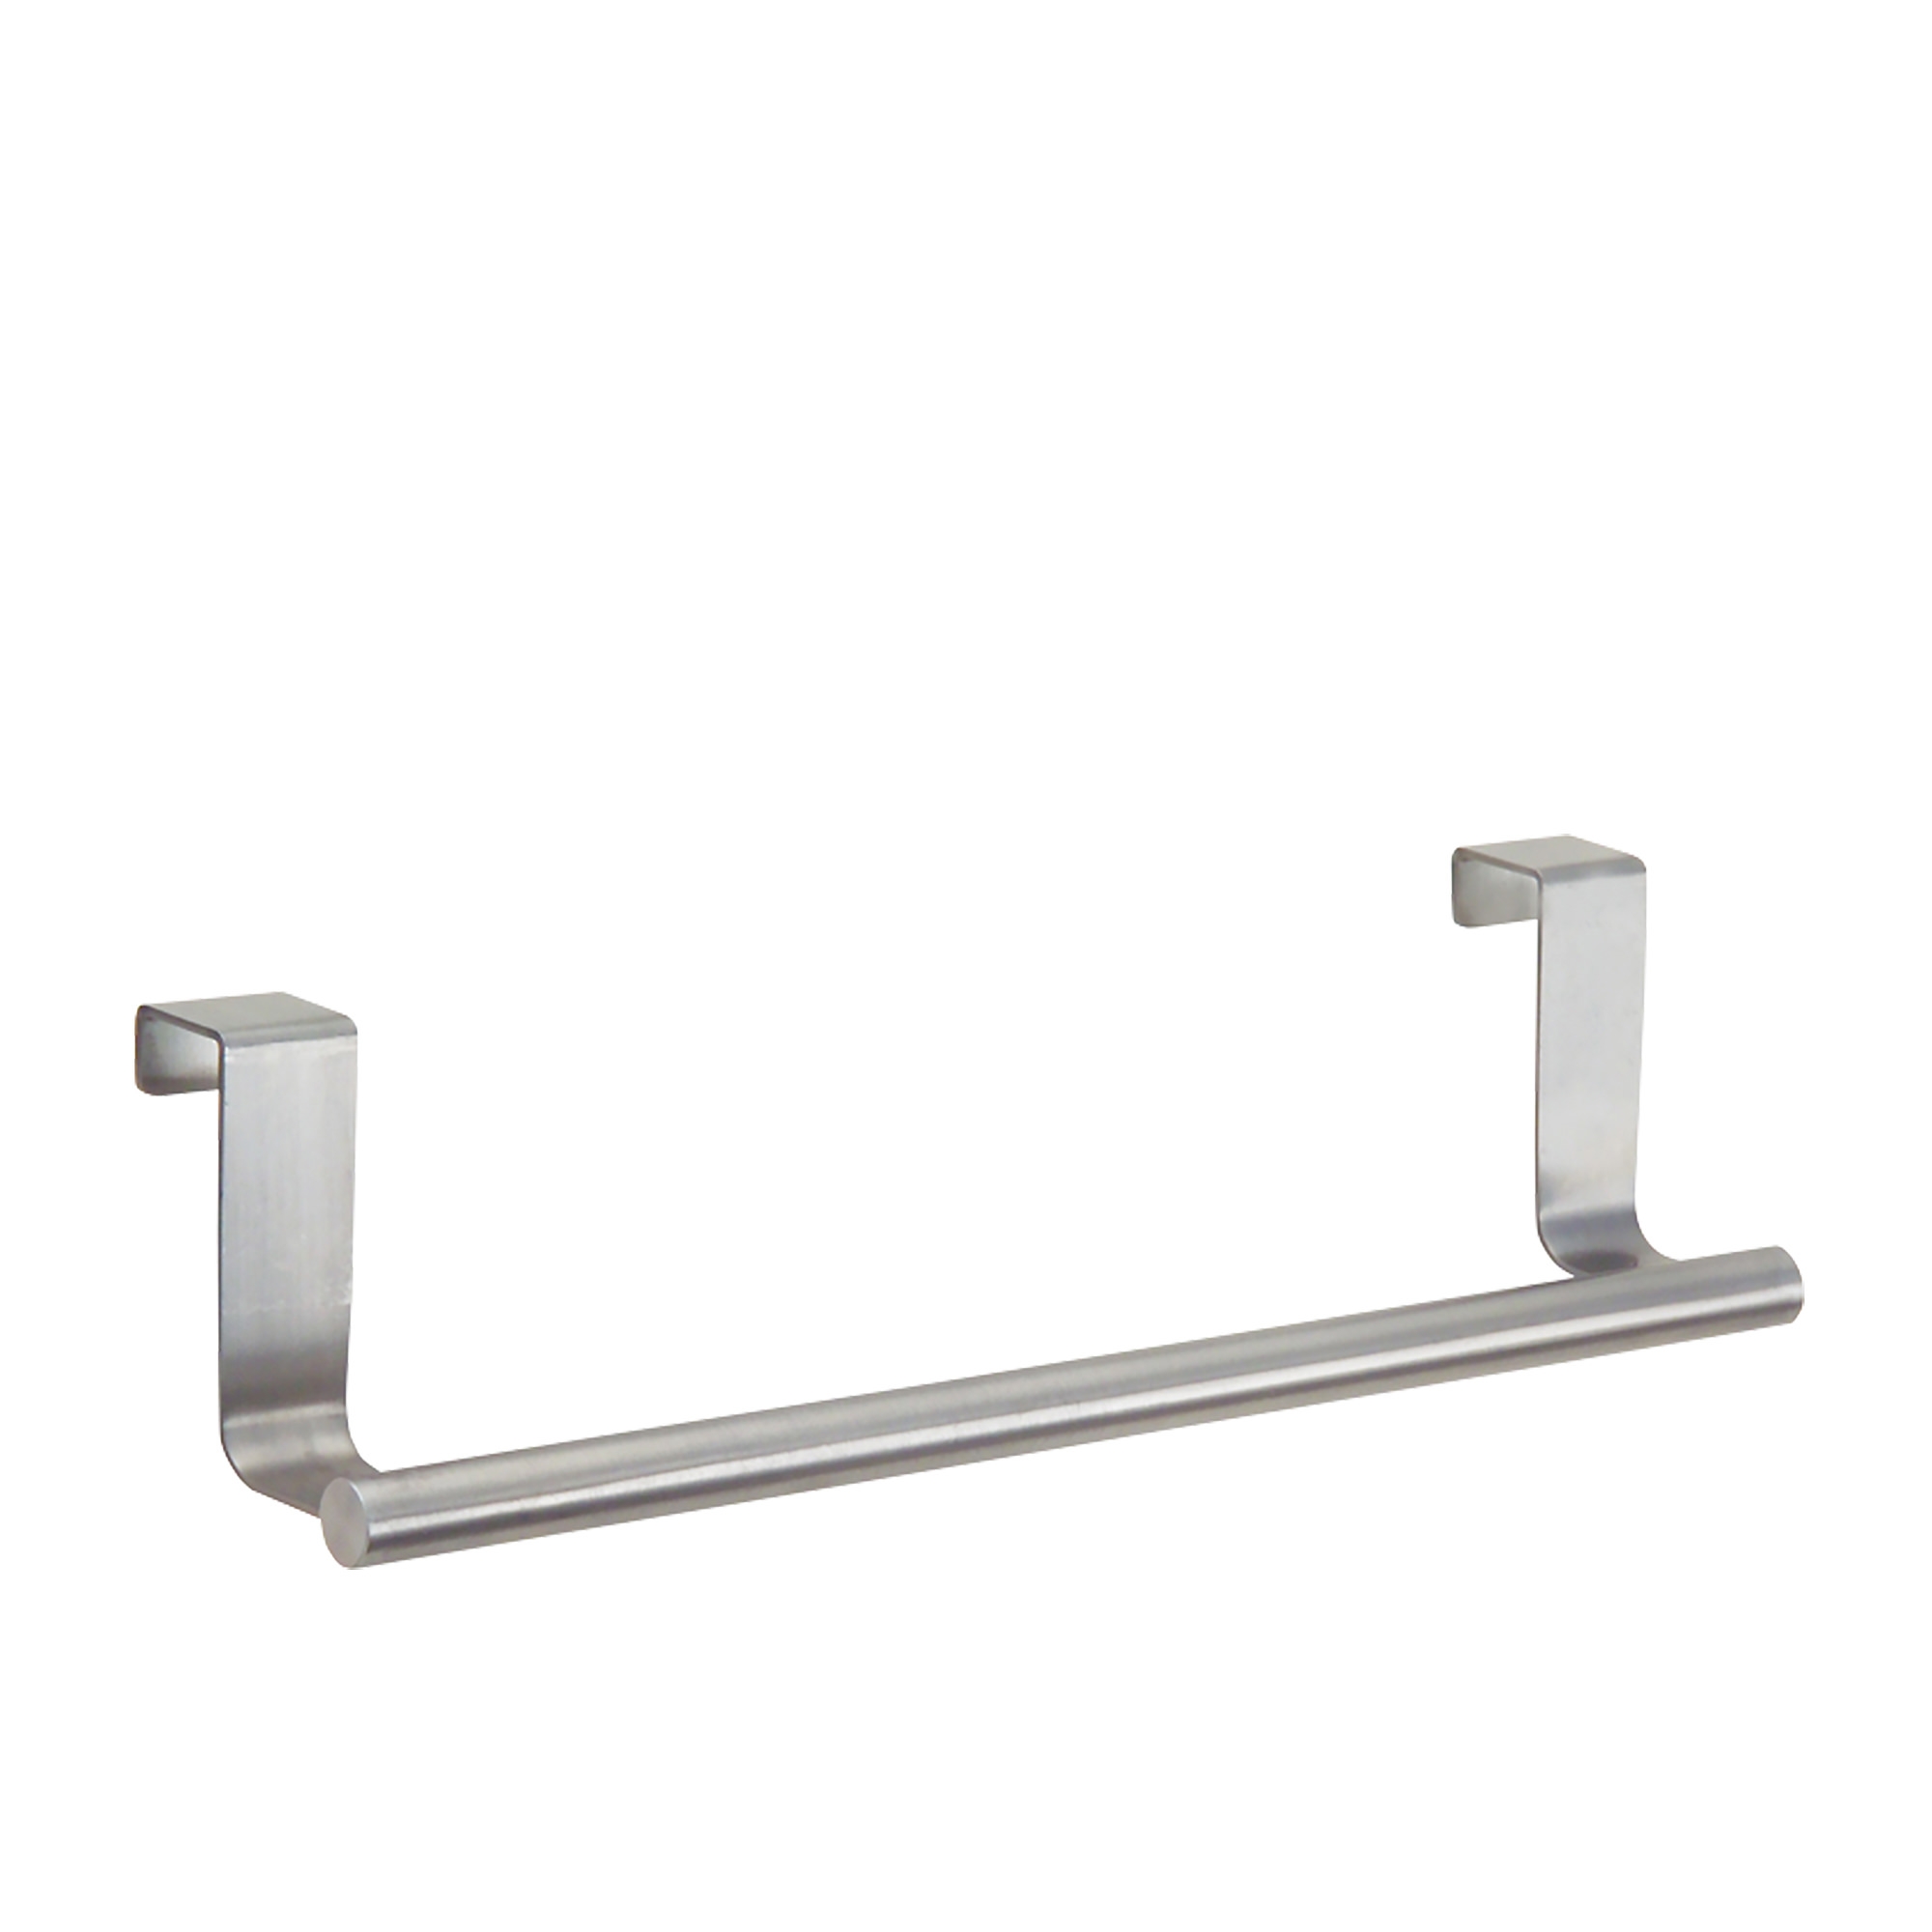 iDesign Forma Over The Cabinet Towel Bar 36x6cm Steel Image 1